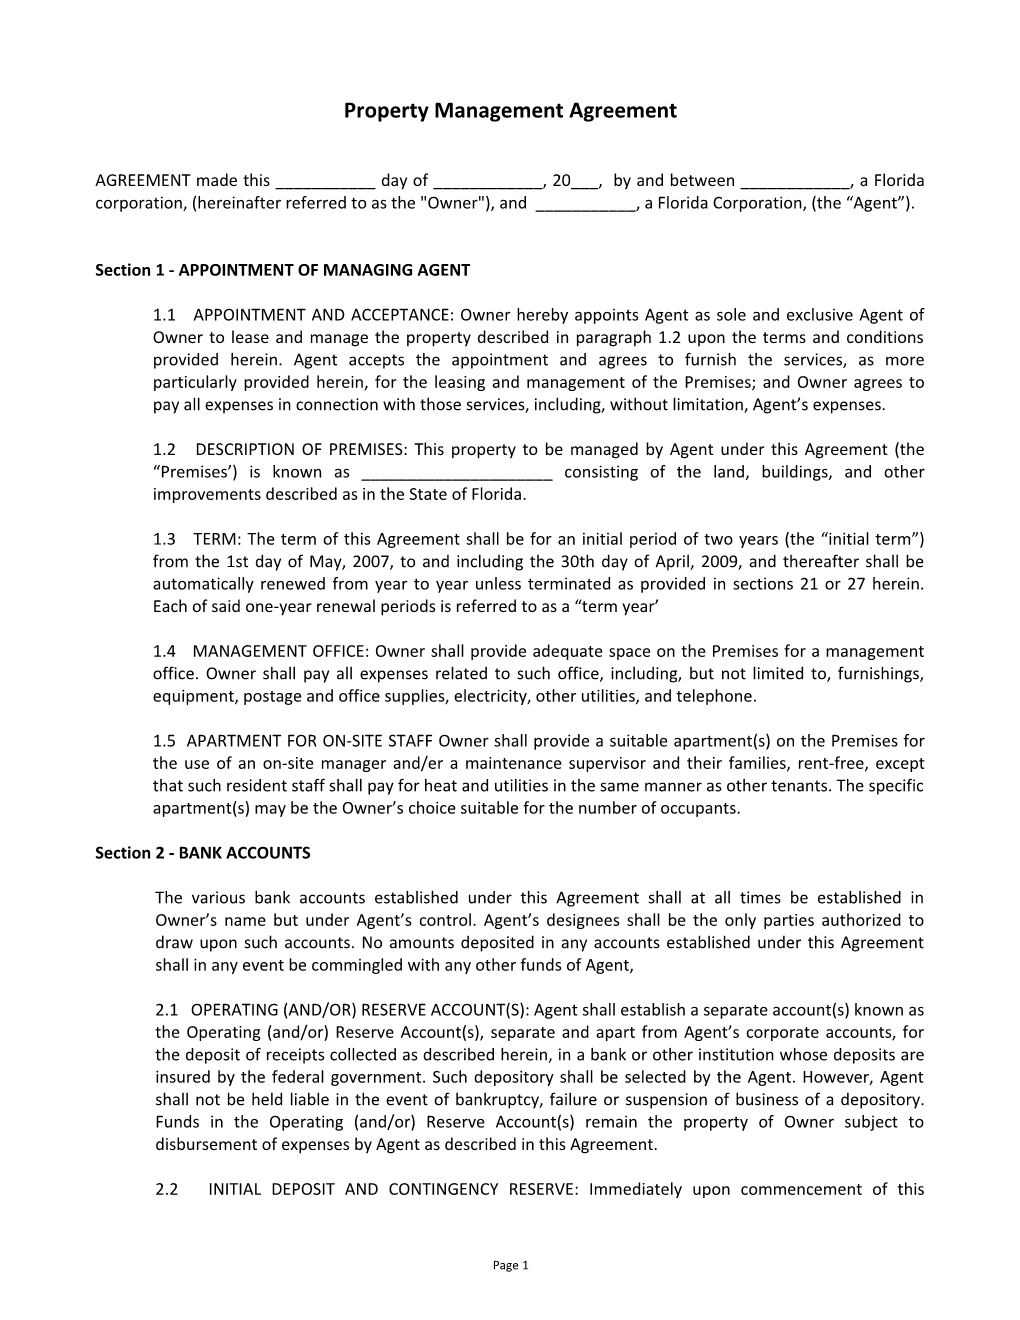 Section 1 - APPOINTMENT of MANAGING AGENT